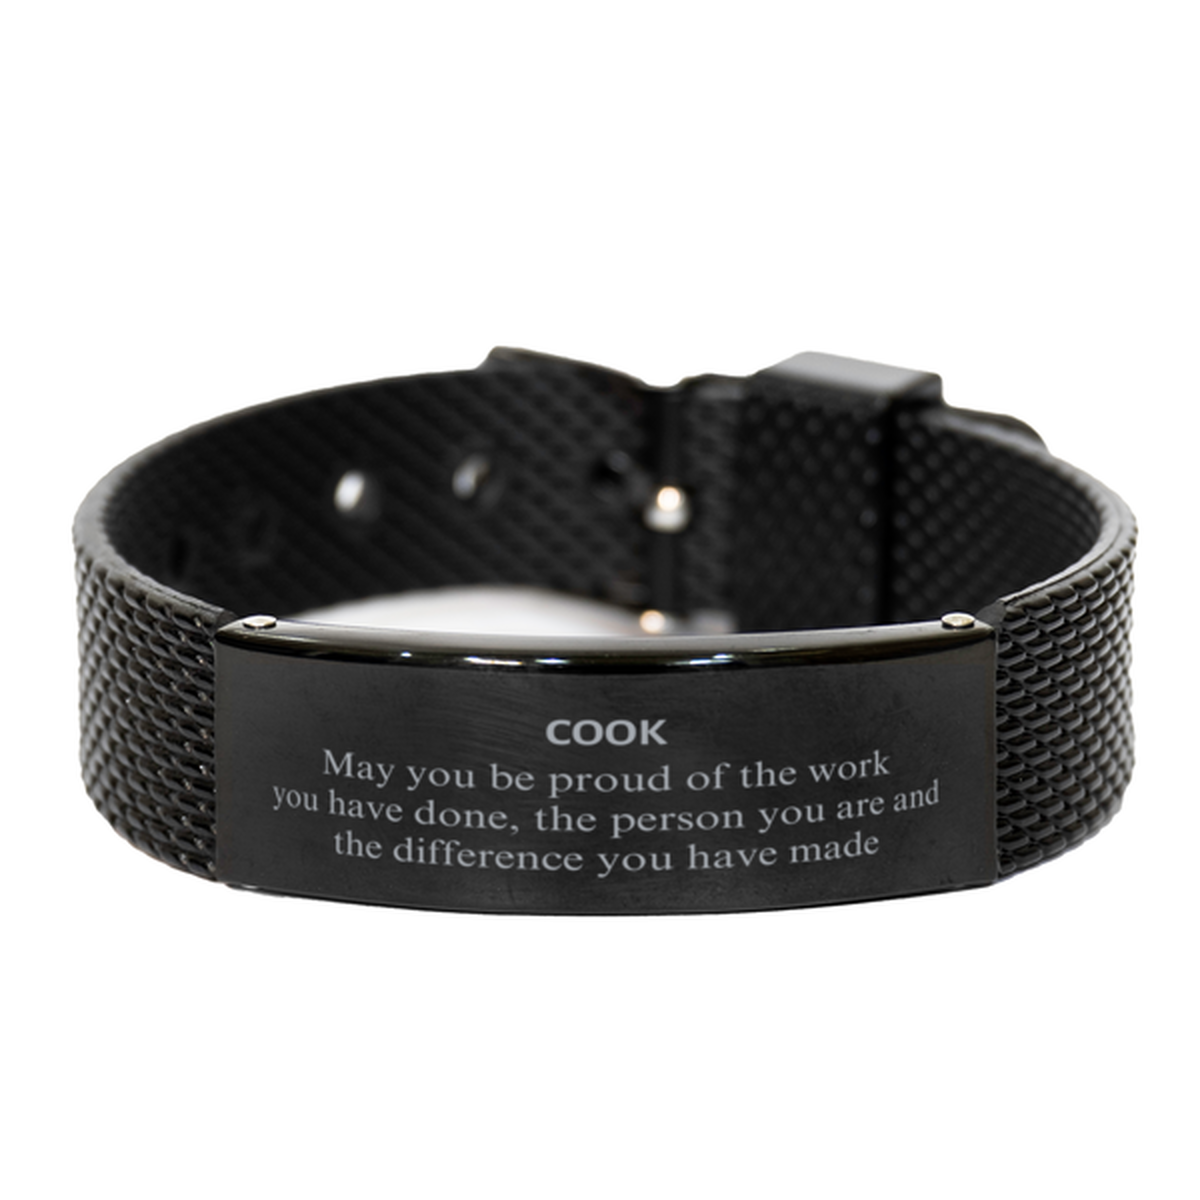 Cook May you be proud of the work you have done, Retirement Cook Black Shark Mesh Bracelet for Colleague Appreciation Gifts Amazing for Cook